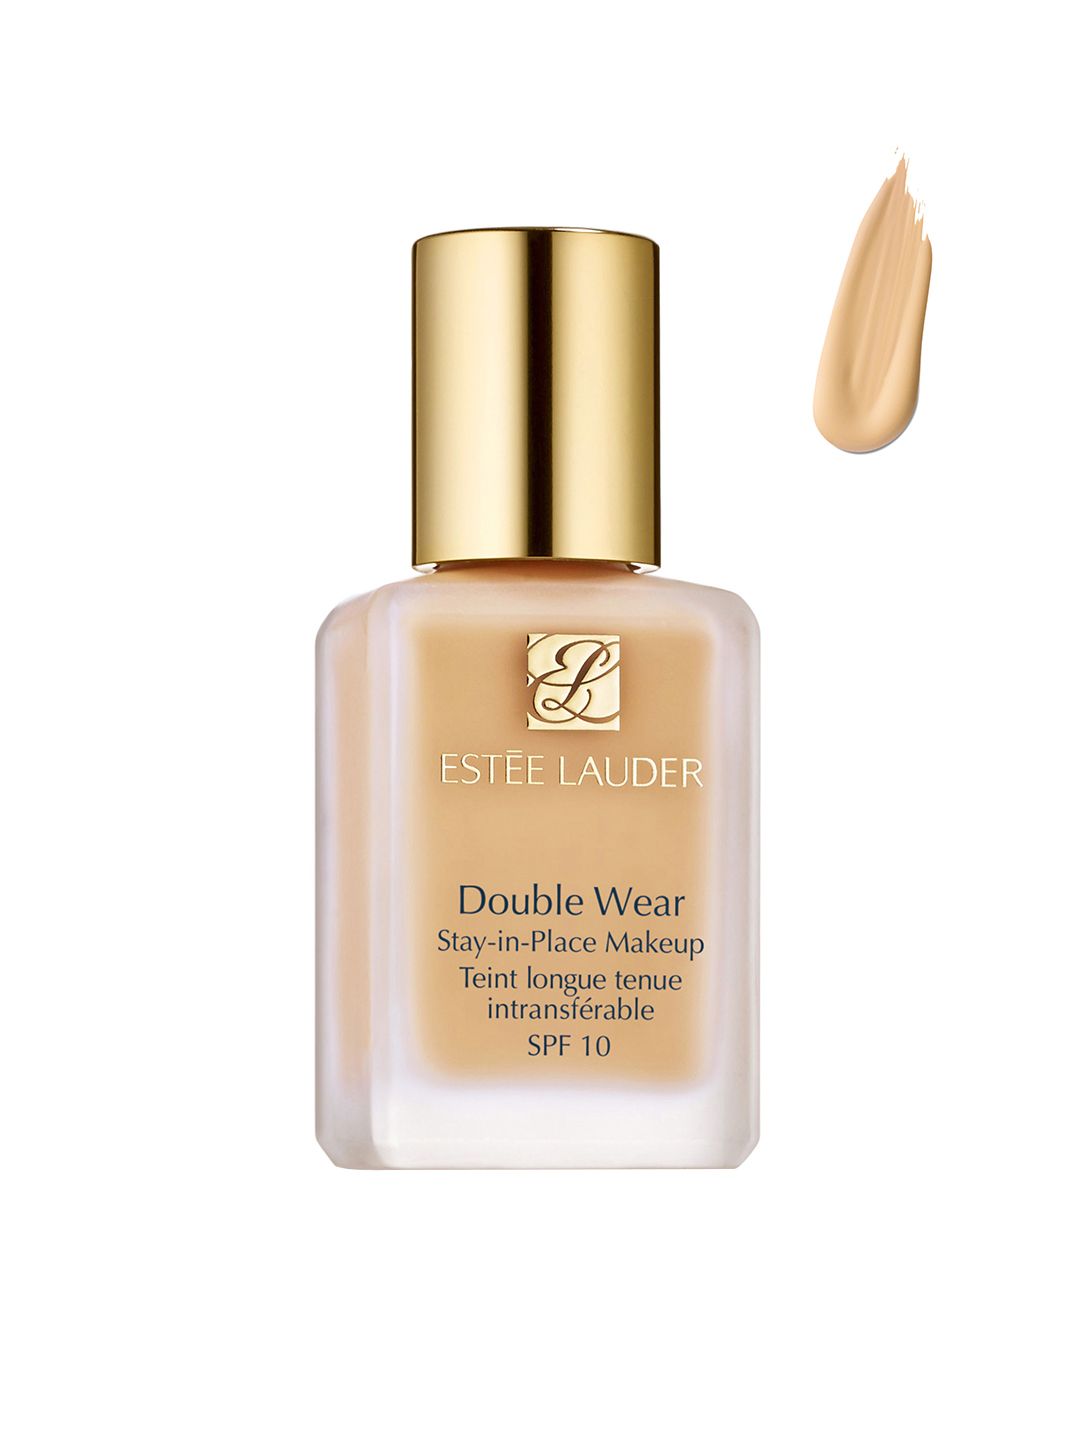 Estee Lauder Double Wear Stay-in-Place Makeup Foundation with SPF 10 - Warm Porcelain 30ml Price in India